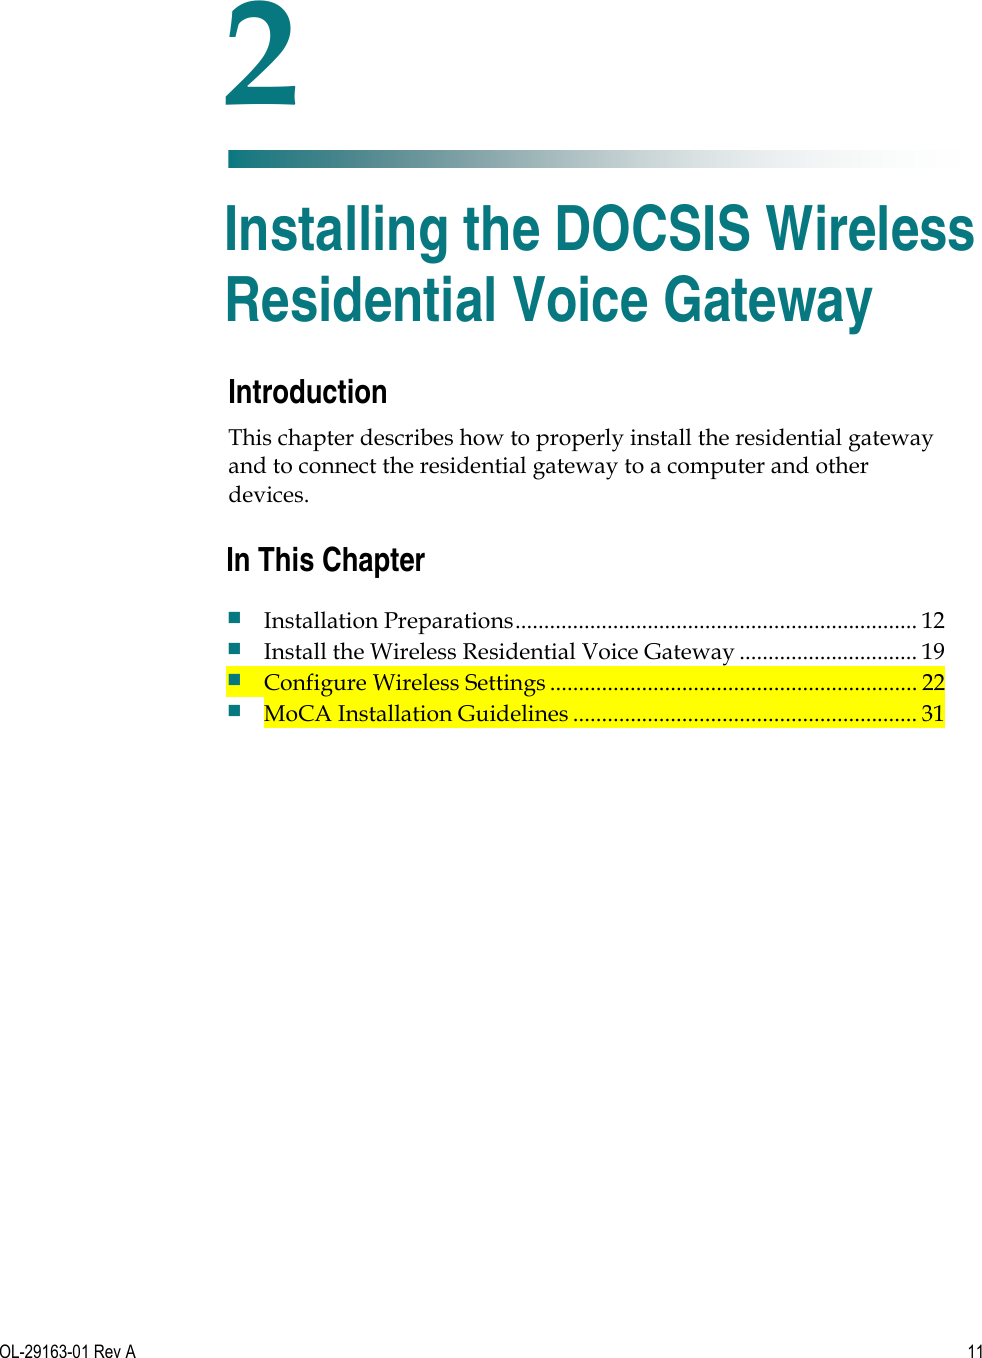   OL-29163-01 Rev A 11  Introduction This chapter describes how to properly install the residential gateway and to connect the residential gateway to a computer and other devices.    2 Chapter 2 Installing the DOCSIS Wireless Residential Voice Gateway In This Chapter  Installation Preparations ...................................................................... 12  Install the Wireless Residential Voice Gateway ............................... 19  Configure Wireless Settings ................................................................ 22  MoCA Installation Guidelines ............................................................ 31 